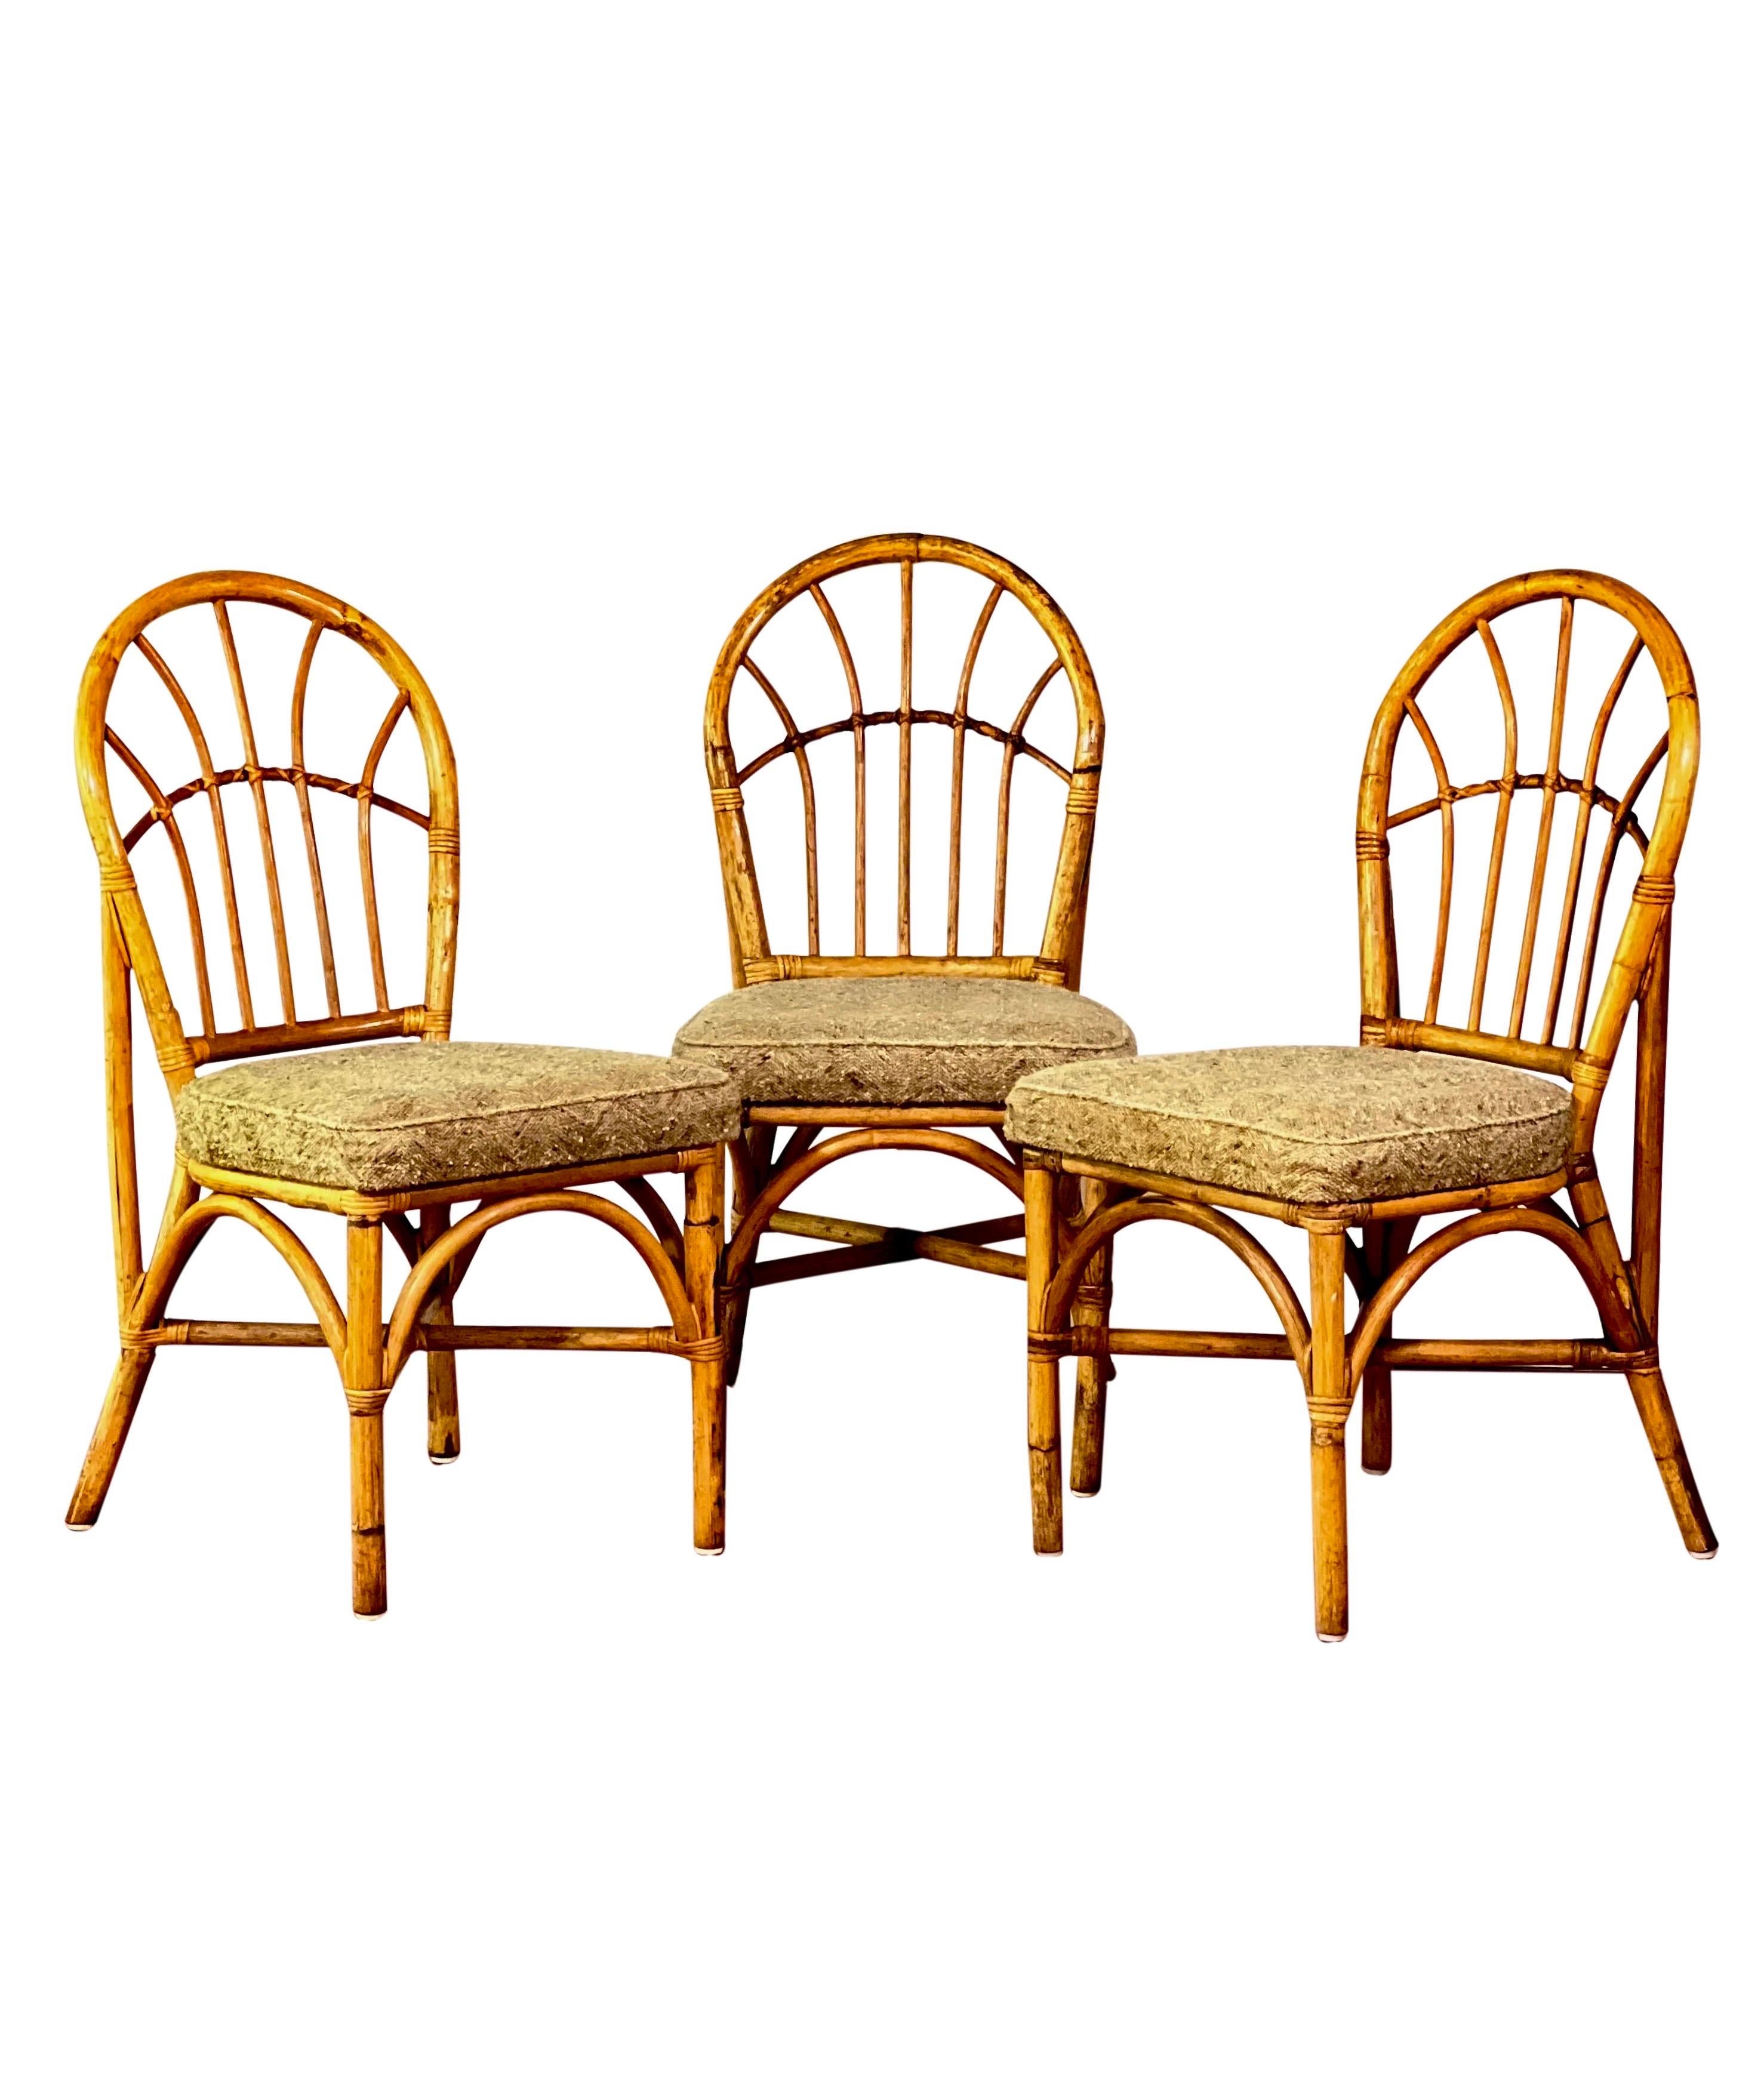 Set of 4 vintage bamboo upholstered dining chairs, 1960s.

Chairs are upholstered in a textured herringbone pattern wool in a neutral oatmeal color. The cushions are attached to the frame and in good condition with no tears, rips or stains. All